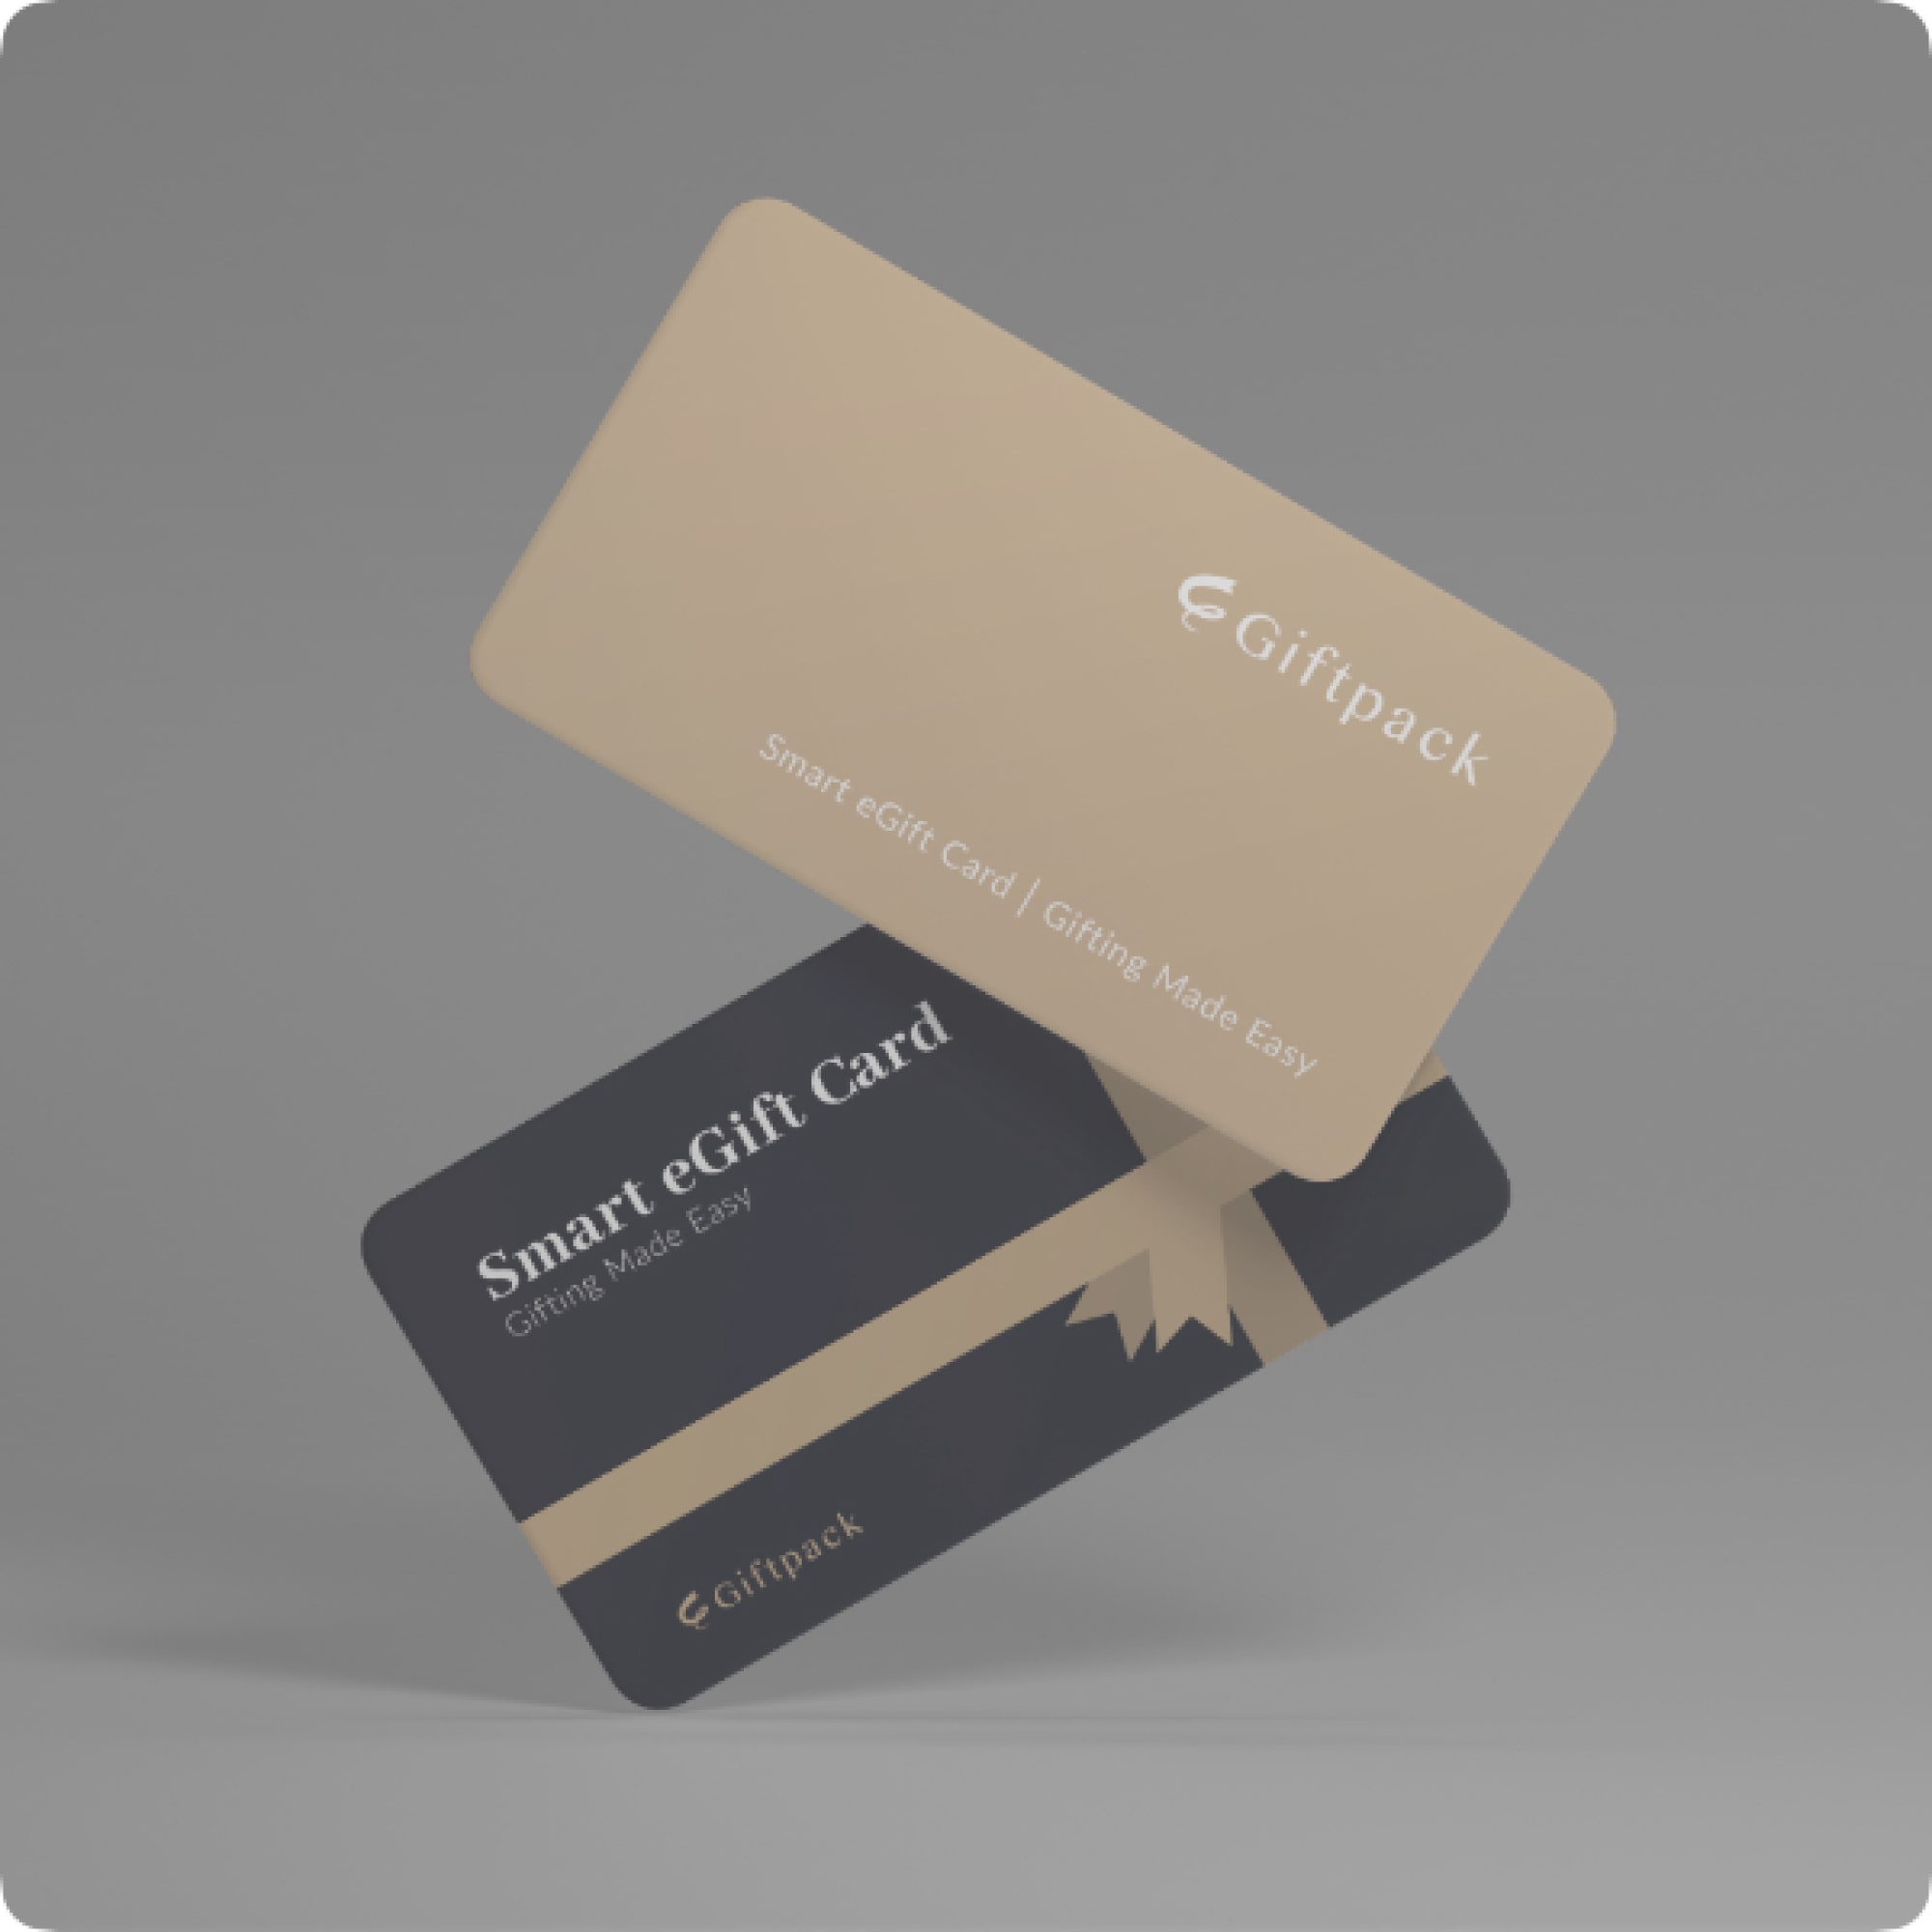 Giftpack Smart eGift Card, begs the question, are employee gift cards taxable?